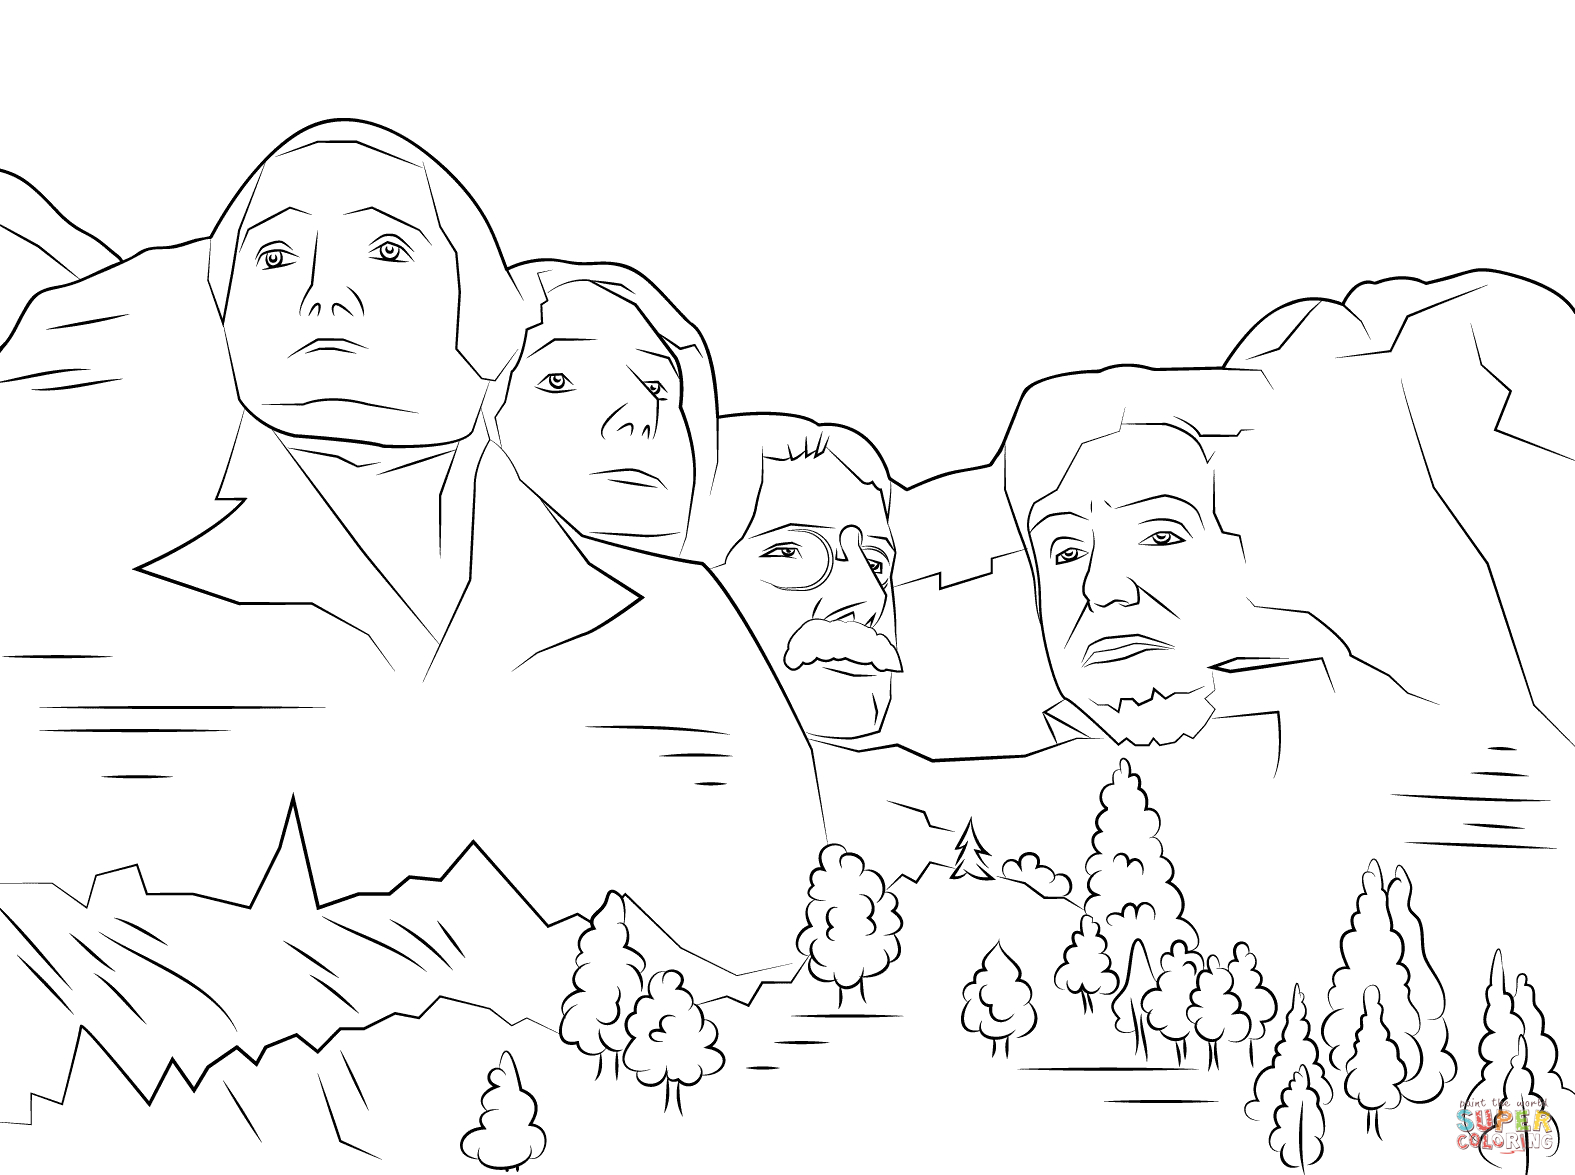 South Park Coloring Page Mount Rushmore Coloring Page Free Printable Coloring Pages